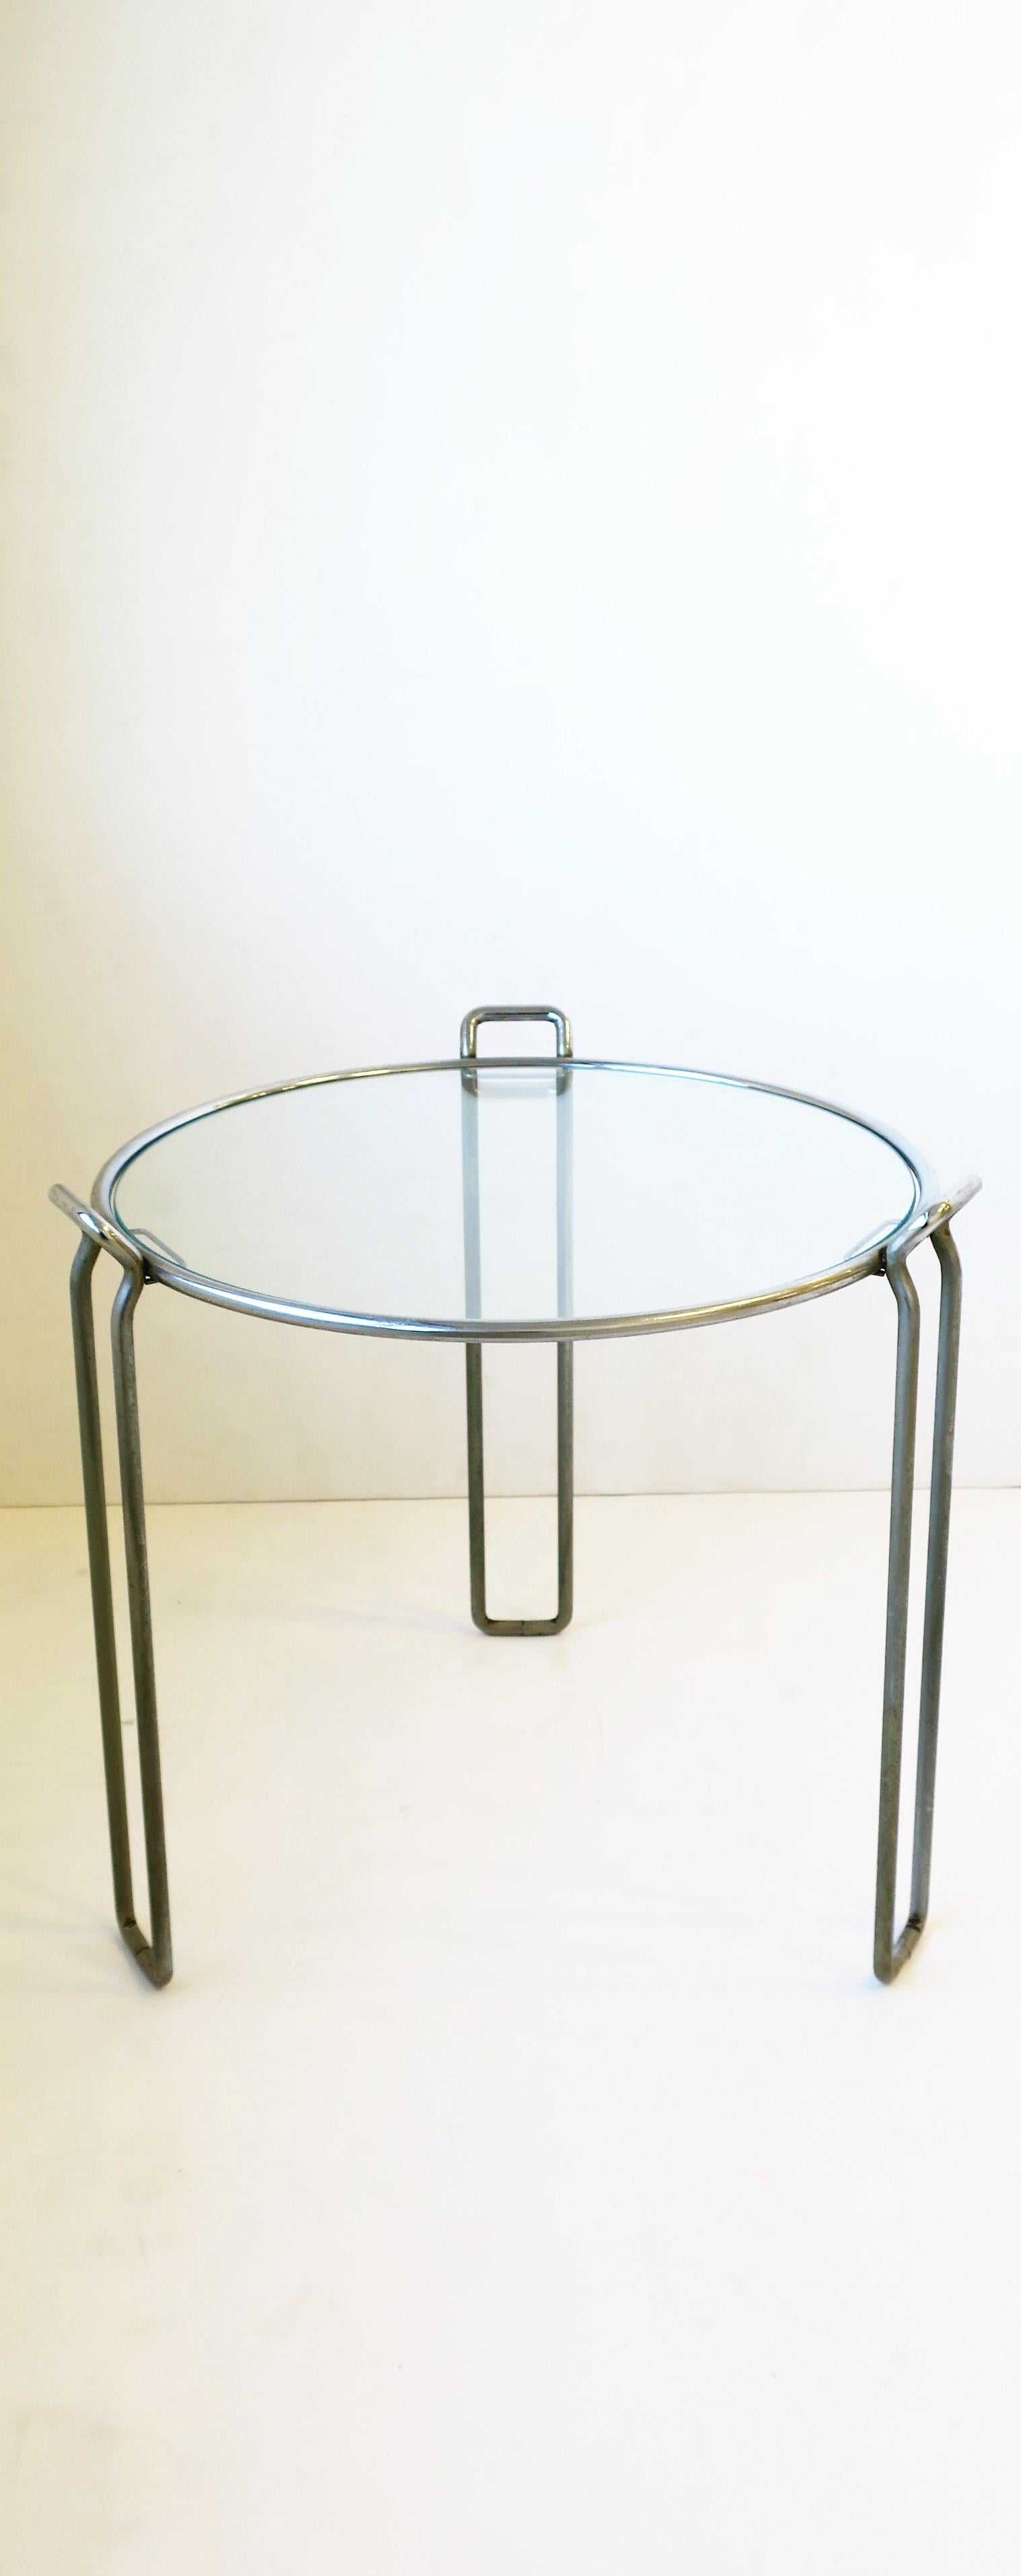 Plated Vintage Modern Chrome and Glass Side or Drinks Table, circa 1960s